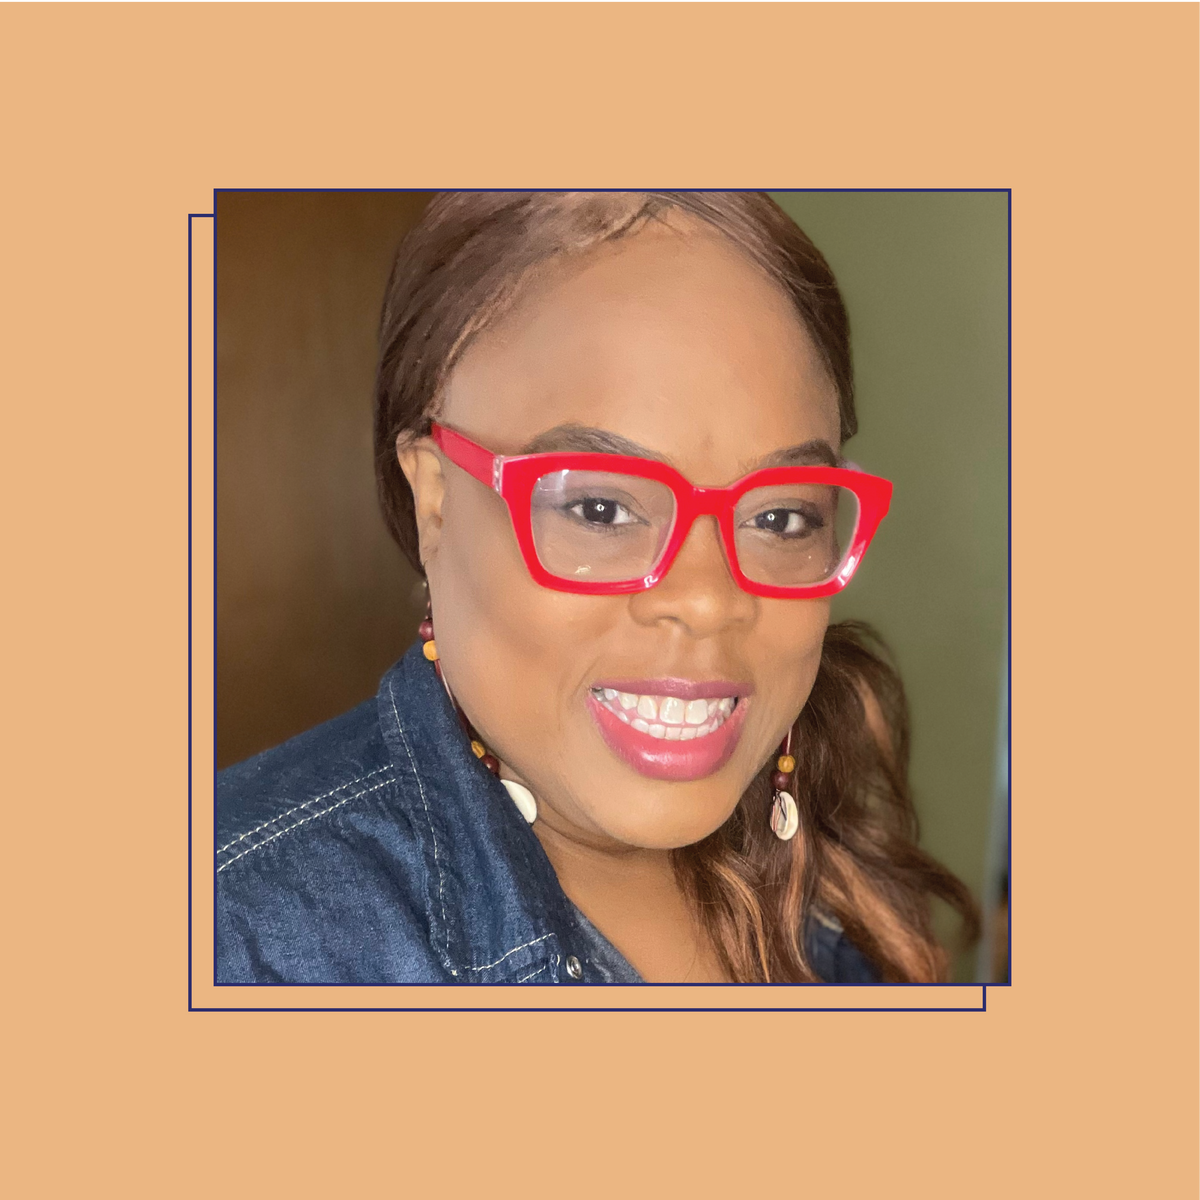 Kimberly Parris, founder of The Cuterie Box